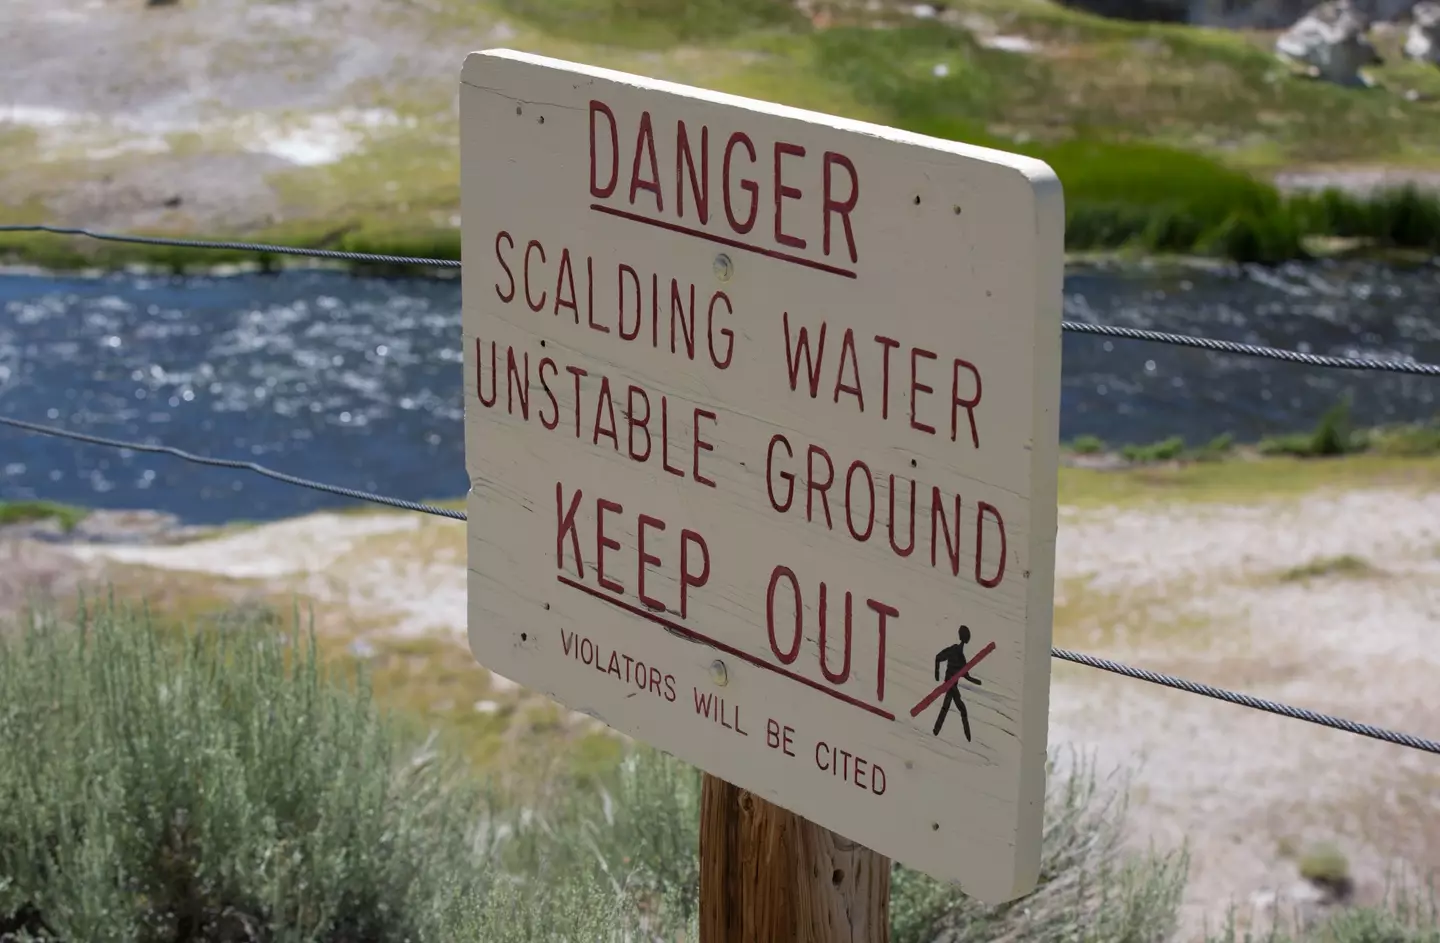 There are warning signs located across the Long Valley caldera.